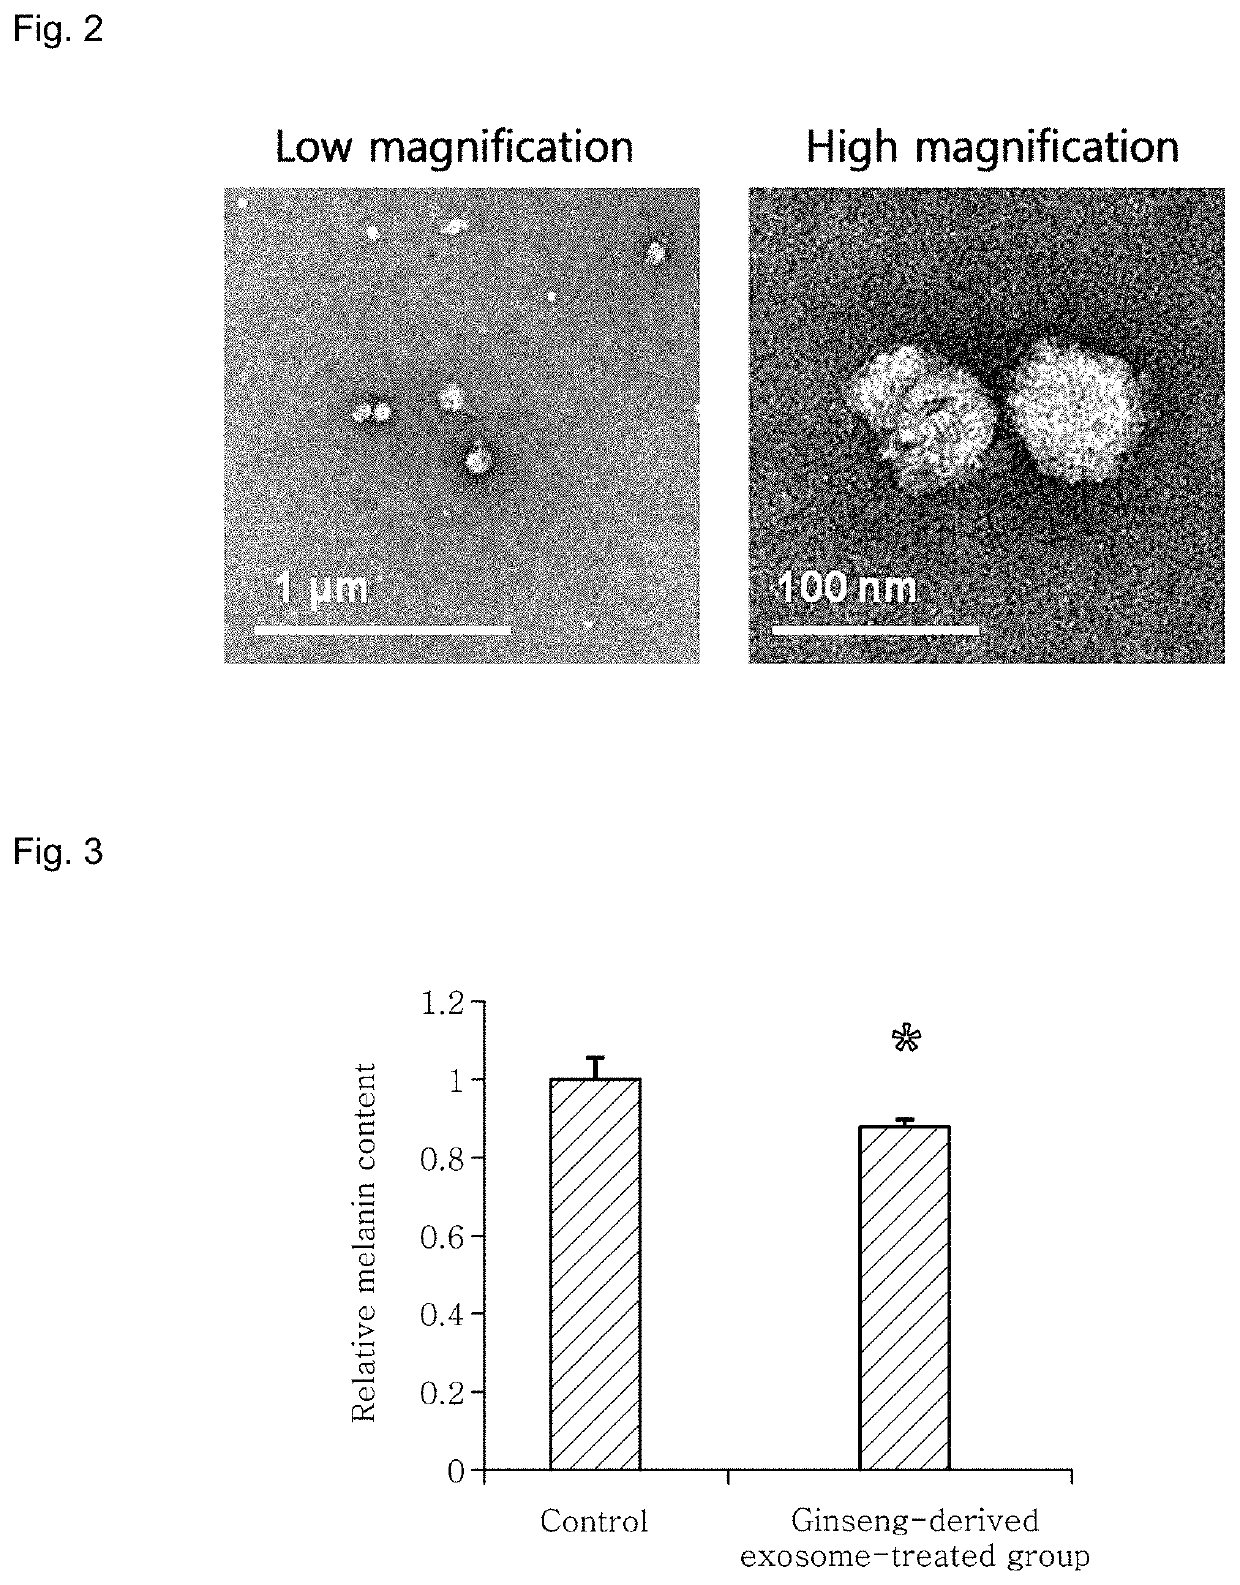 Lightening composition comprising ginseng-derived exosome-like vesicles